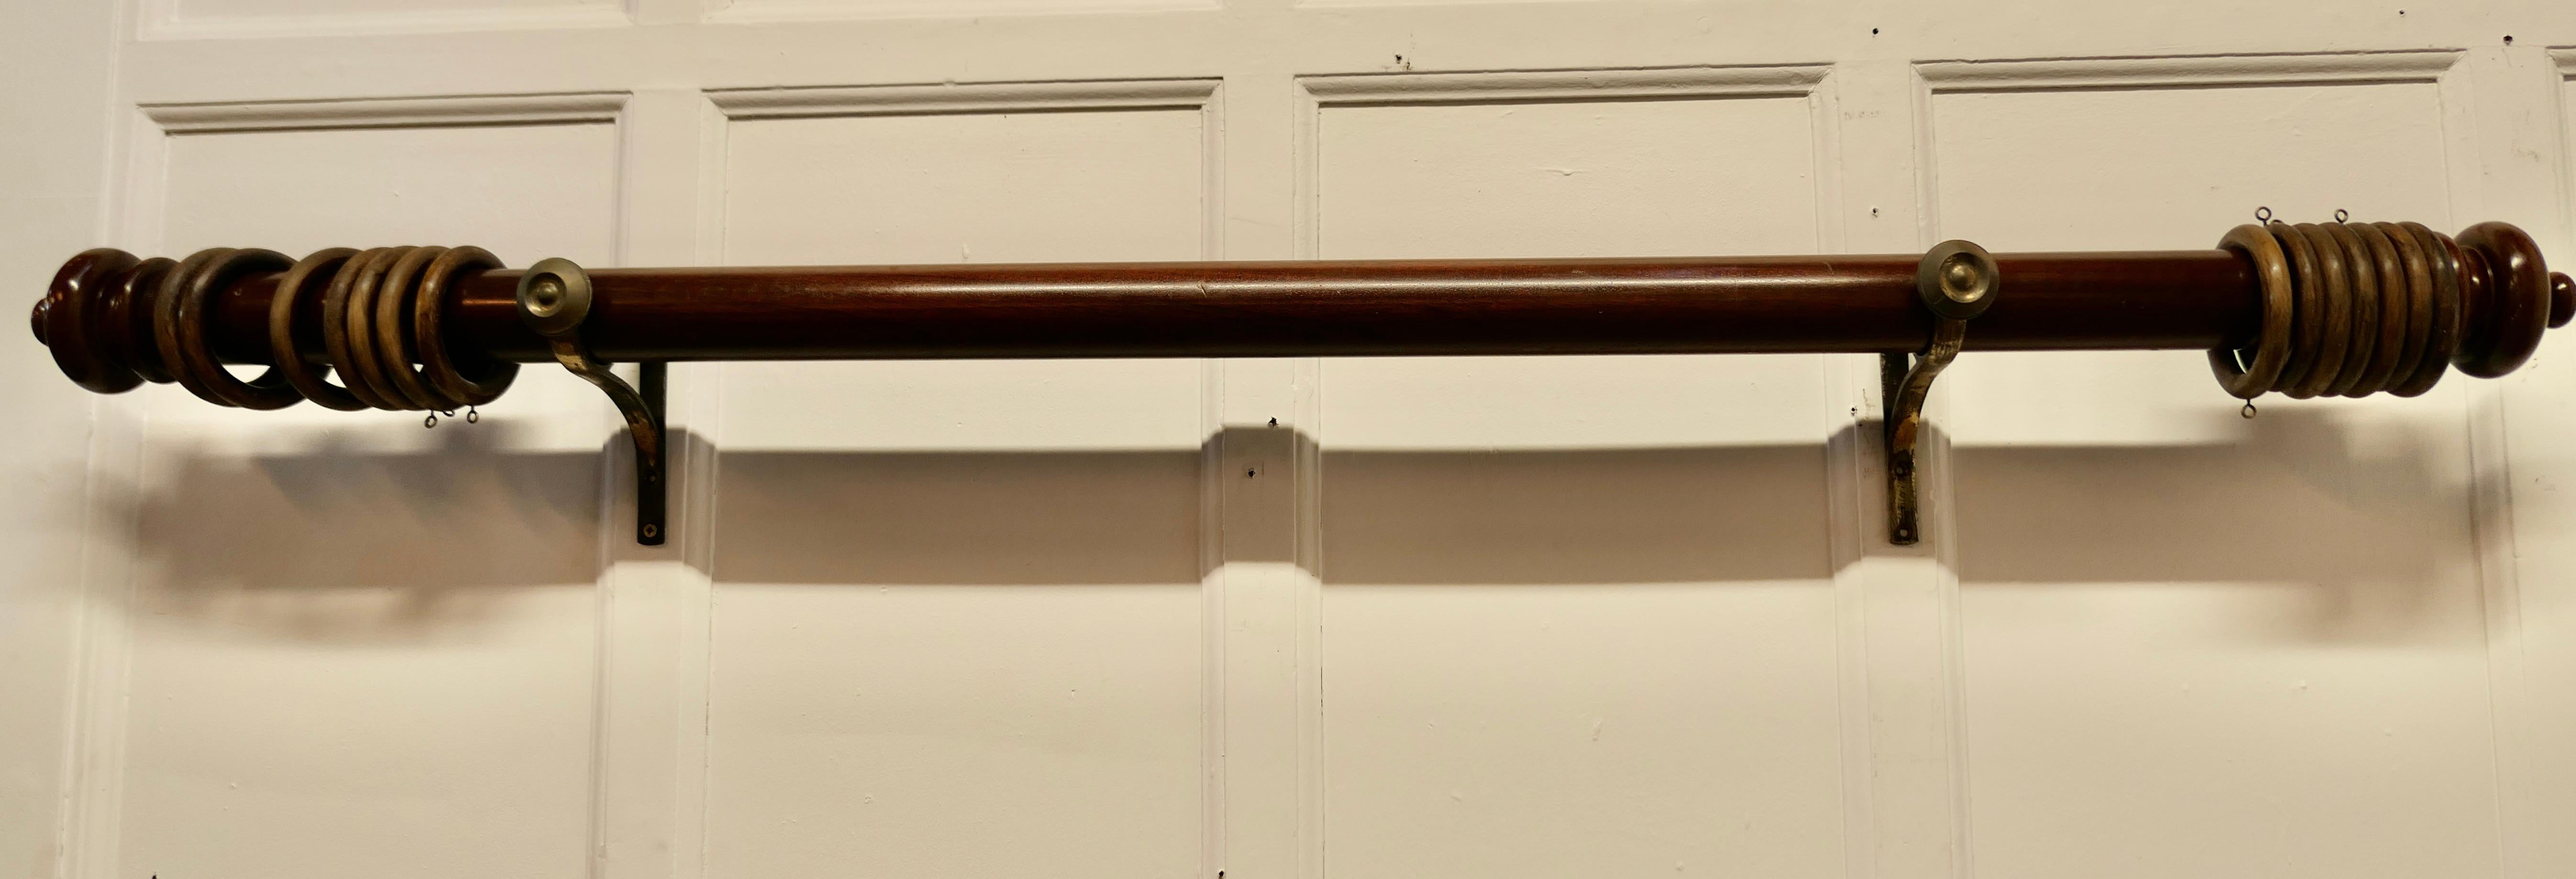 2 Victorian Curtain Poles with Rings 2 Matching Poles In Good Condition For Sale In Chillerton, Isle of Wight